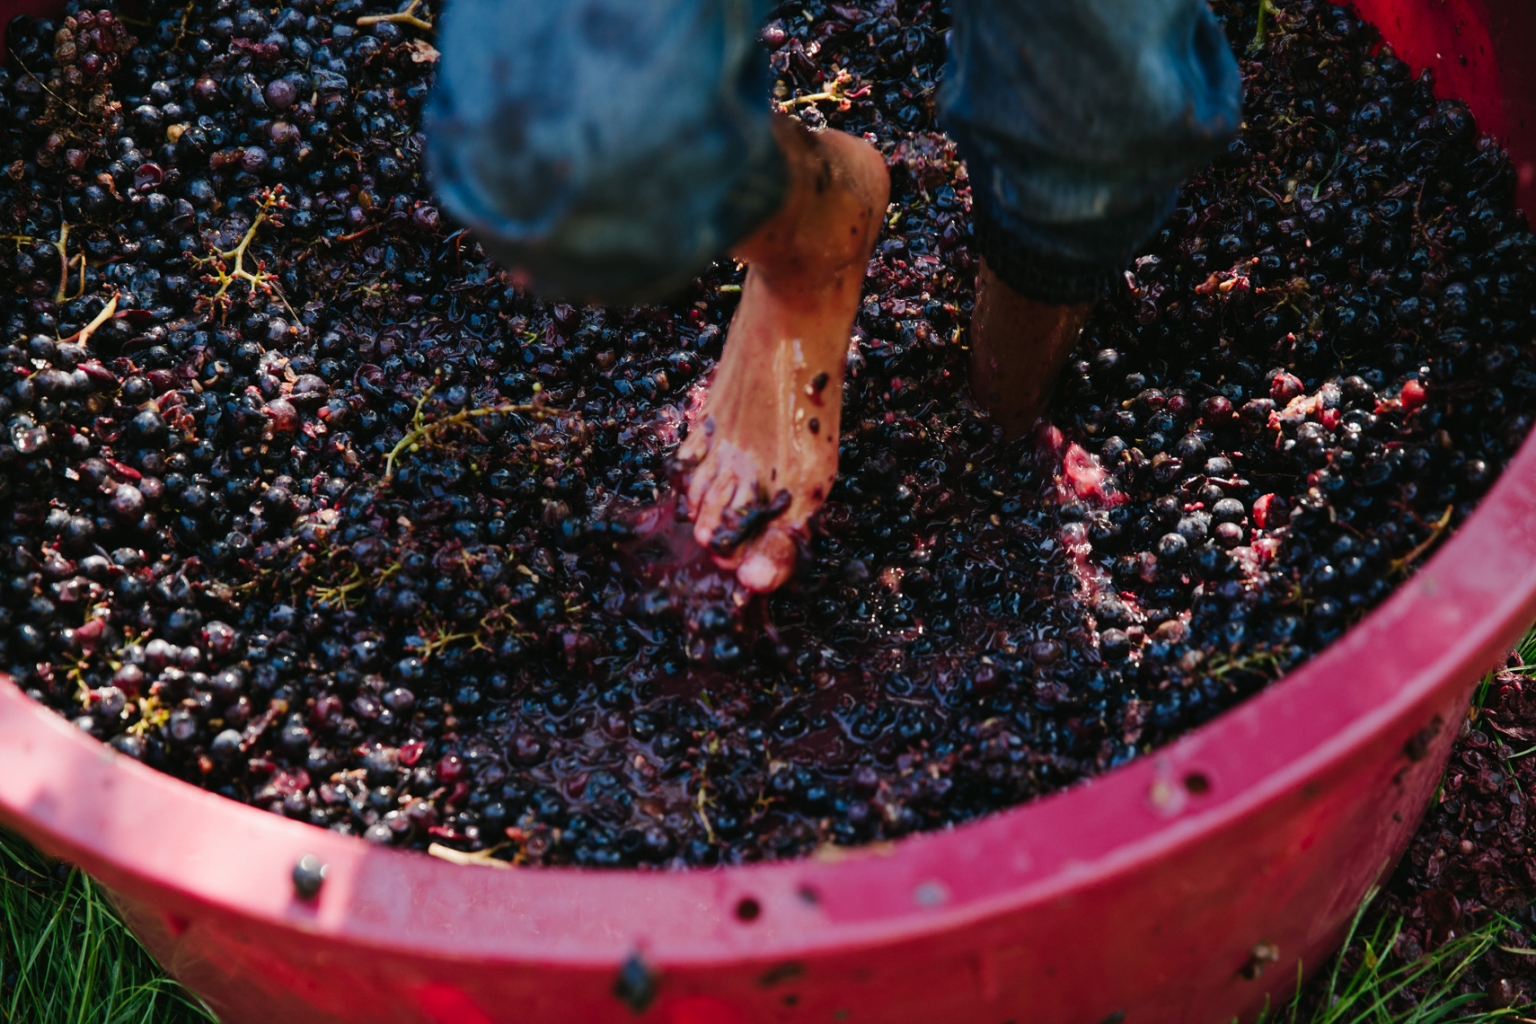 Lifestyle Image by Farhad Samari of feet stamping grapes in a barrel to make wine